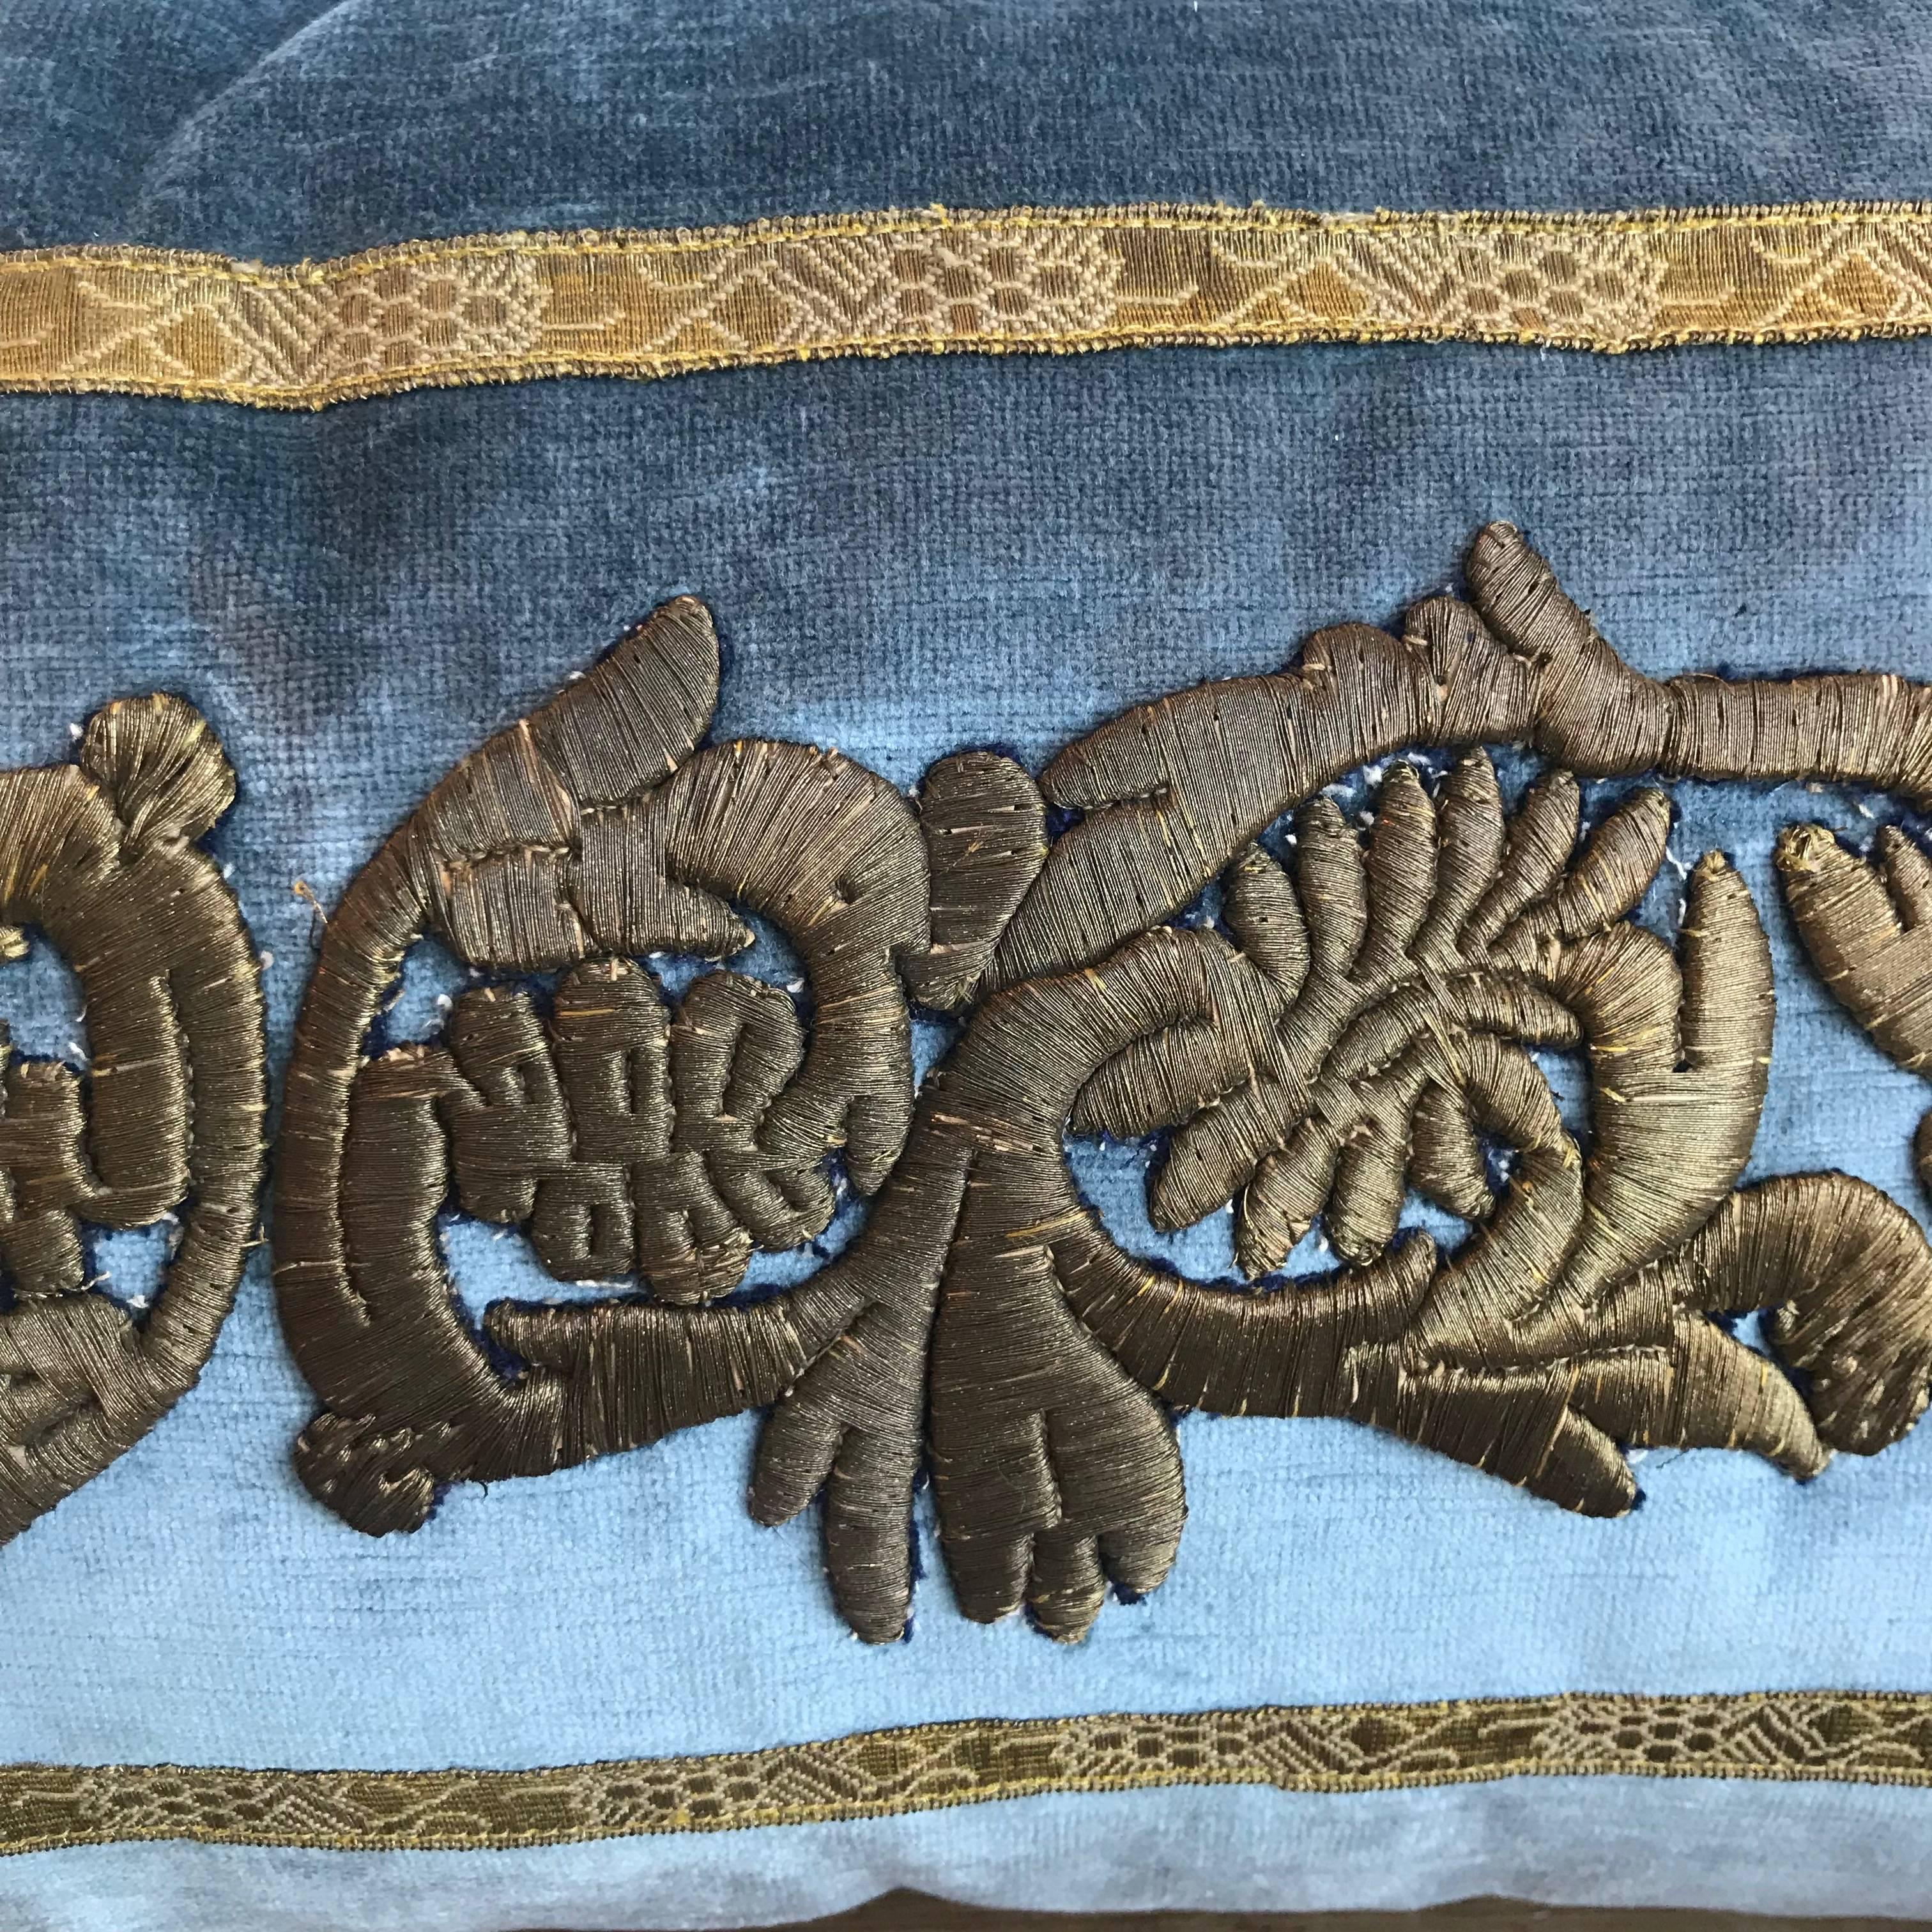 Antique raised gold metallic embroidery thought to be Egyptian or Syrian bordered with antique European gold metallic galon on wedgewood blue velvet. Hand trimmed with gold metallic cording knotted in the corners. Down filled.